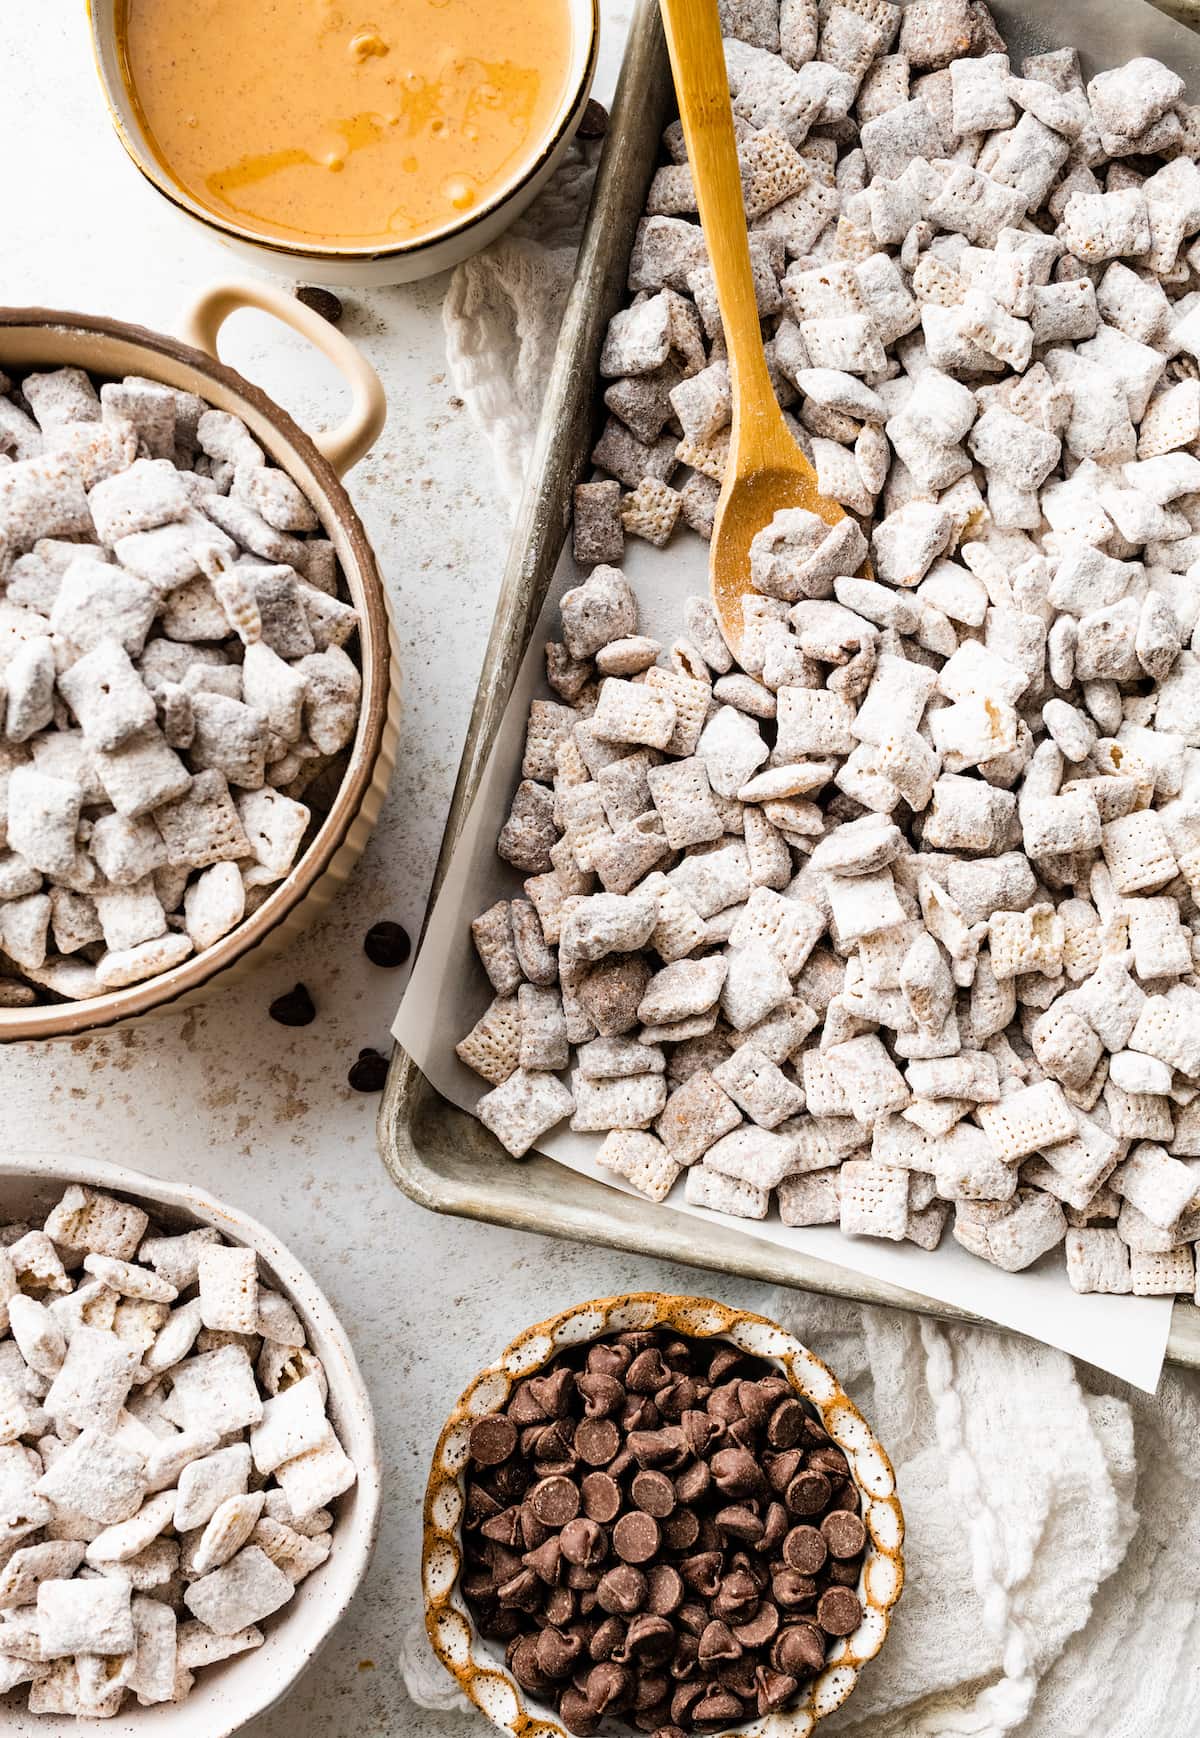 Puppy chow on a baking tray with a wooden spoon near one small bowl of chocolate chips, another small bowl of peanut butter, and other small bowls with the puppy chow.